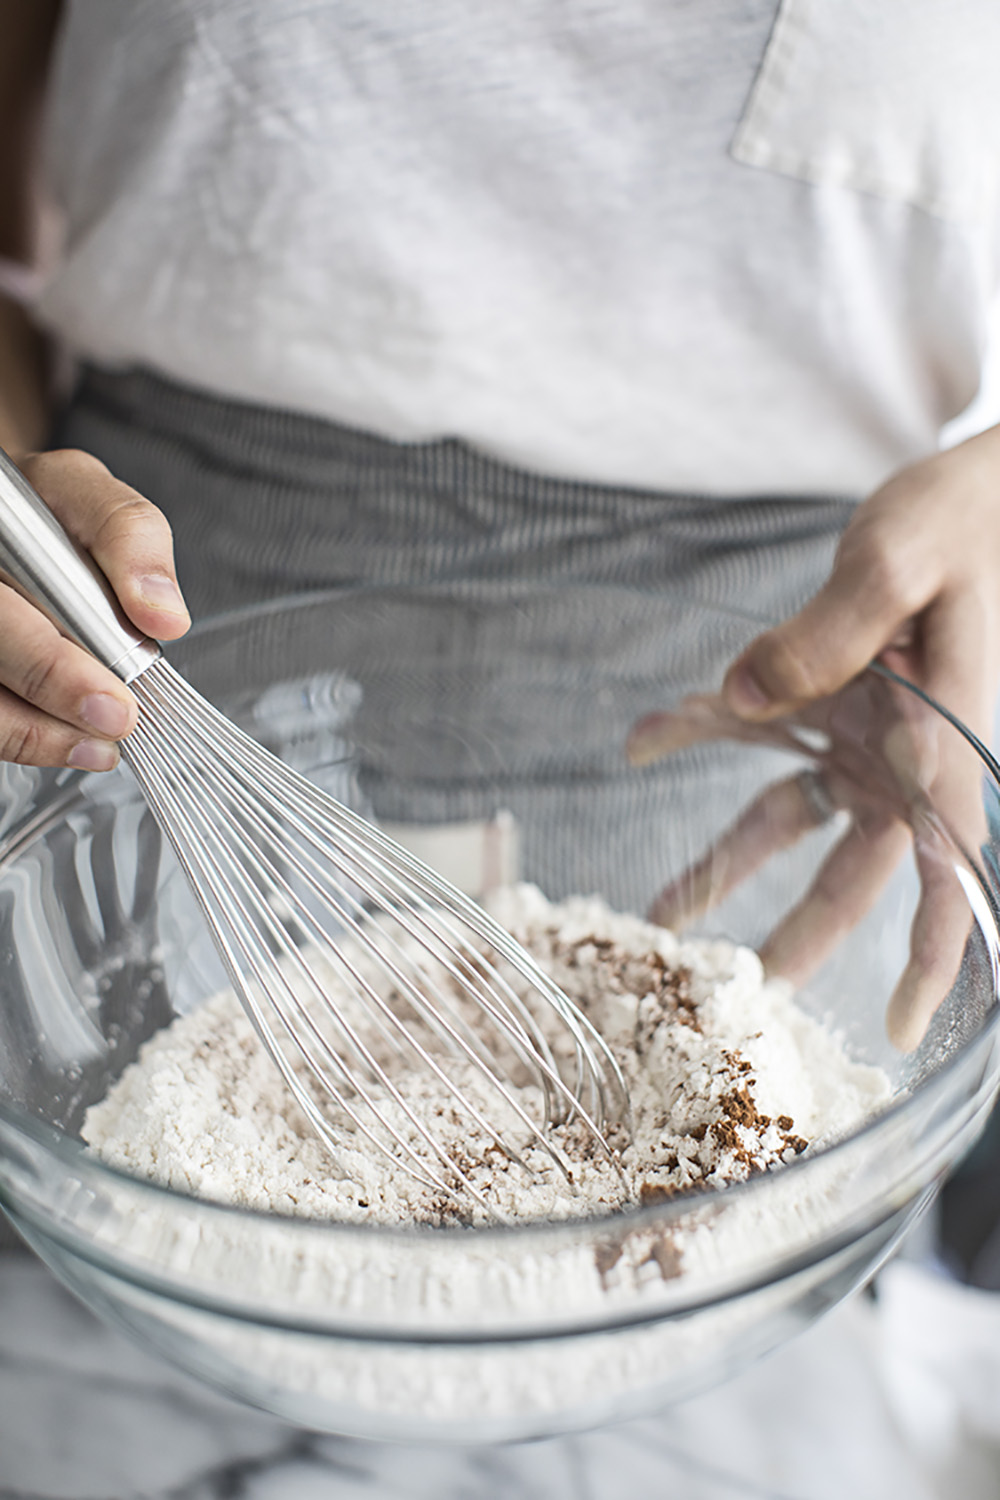 A person using a whisk to combine the dry ingredients in a glass bowl.